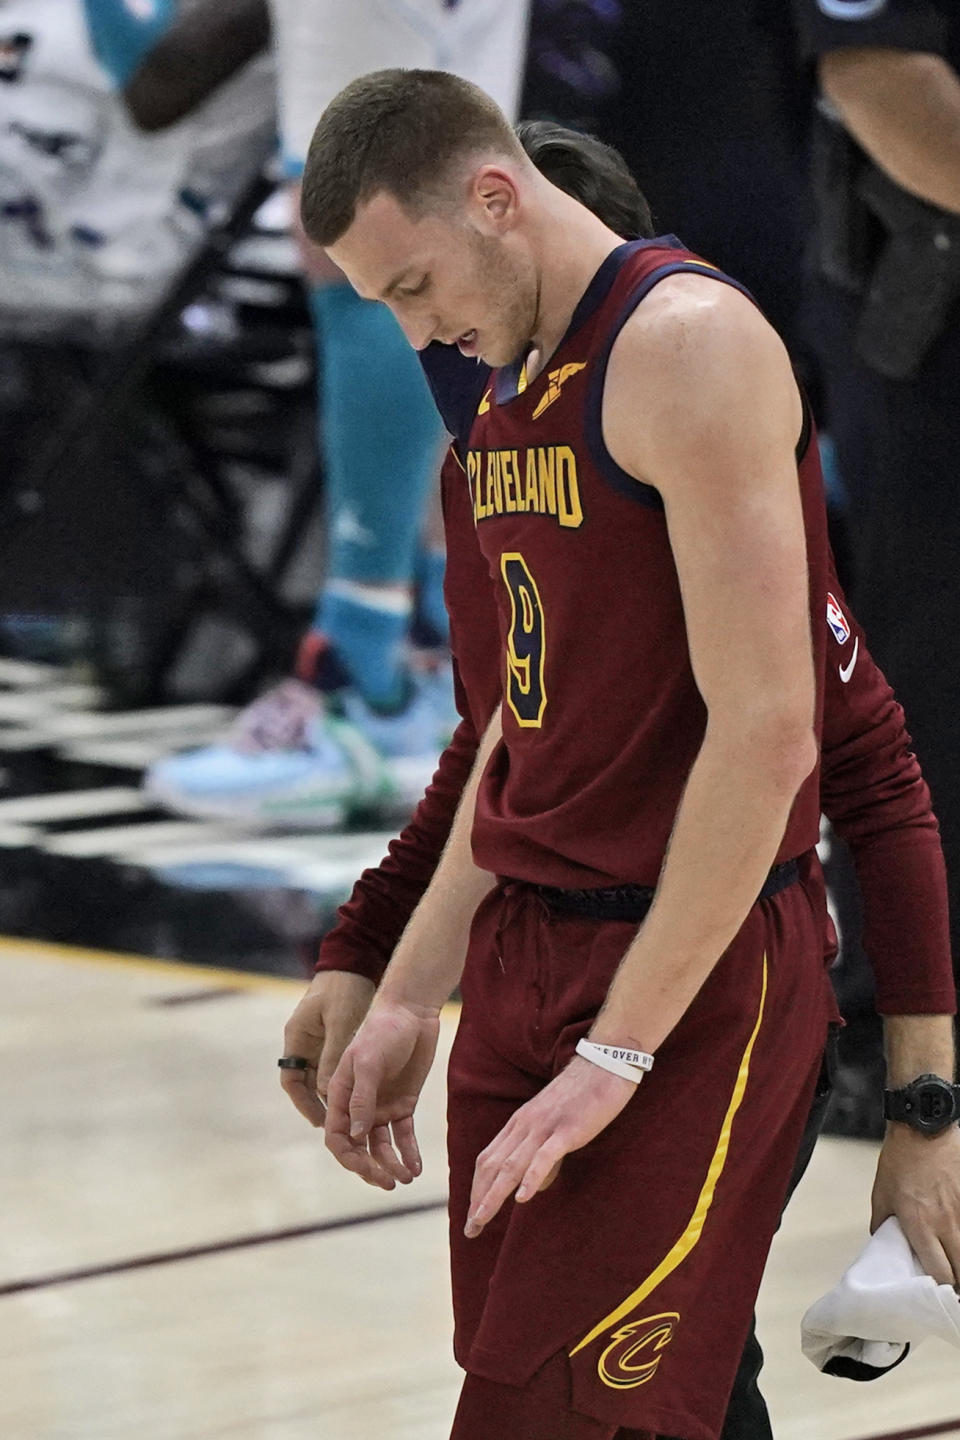 Cleveland Cavaliers' Dylan Windler looks down at his hand as he walks off the court after breaking his left hand in the season opener in the second half of an NBA basketball game against the Charlotte Hornets, Wednesday, Dec. 23, 2020, in Cleveland. The team said Thursday that Windler suffered a fourth metacarpal fracture when he took a hard fall in the third quarter against Charlotte. X-rays after the game were negative, but further tests revealed the fracture. (AP Photo/Tony Dejak)